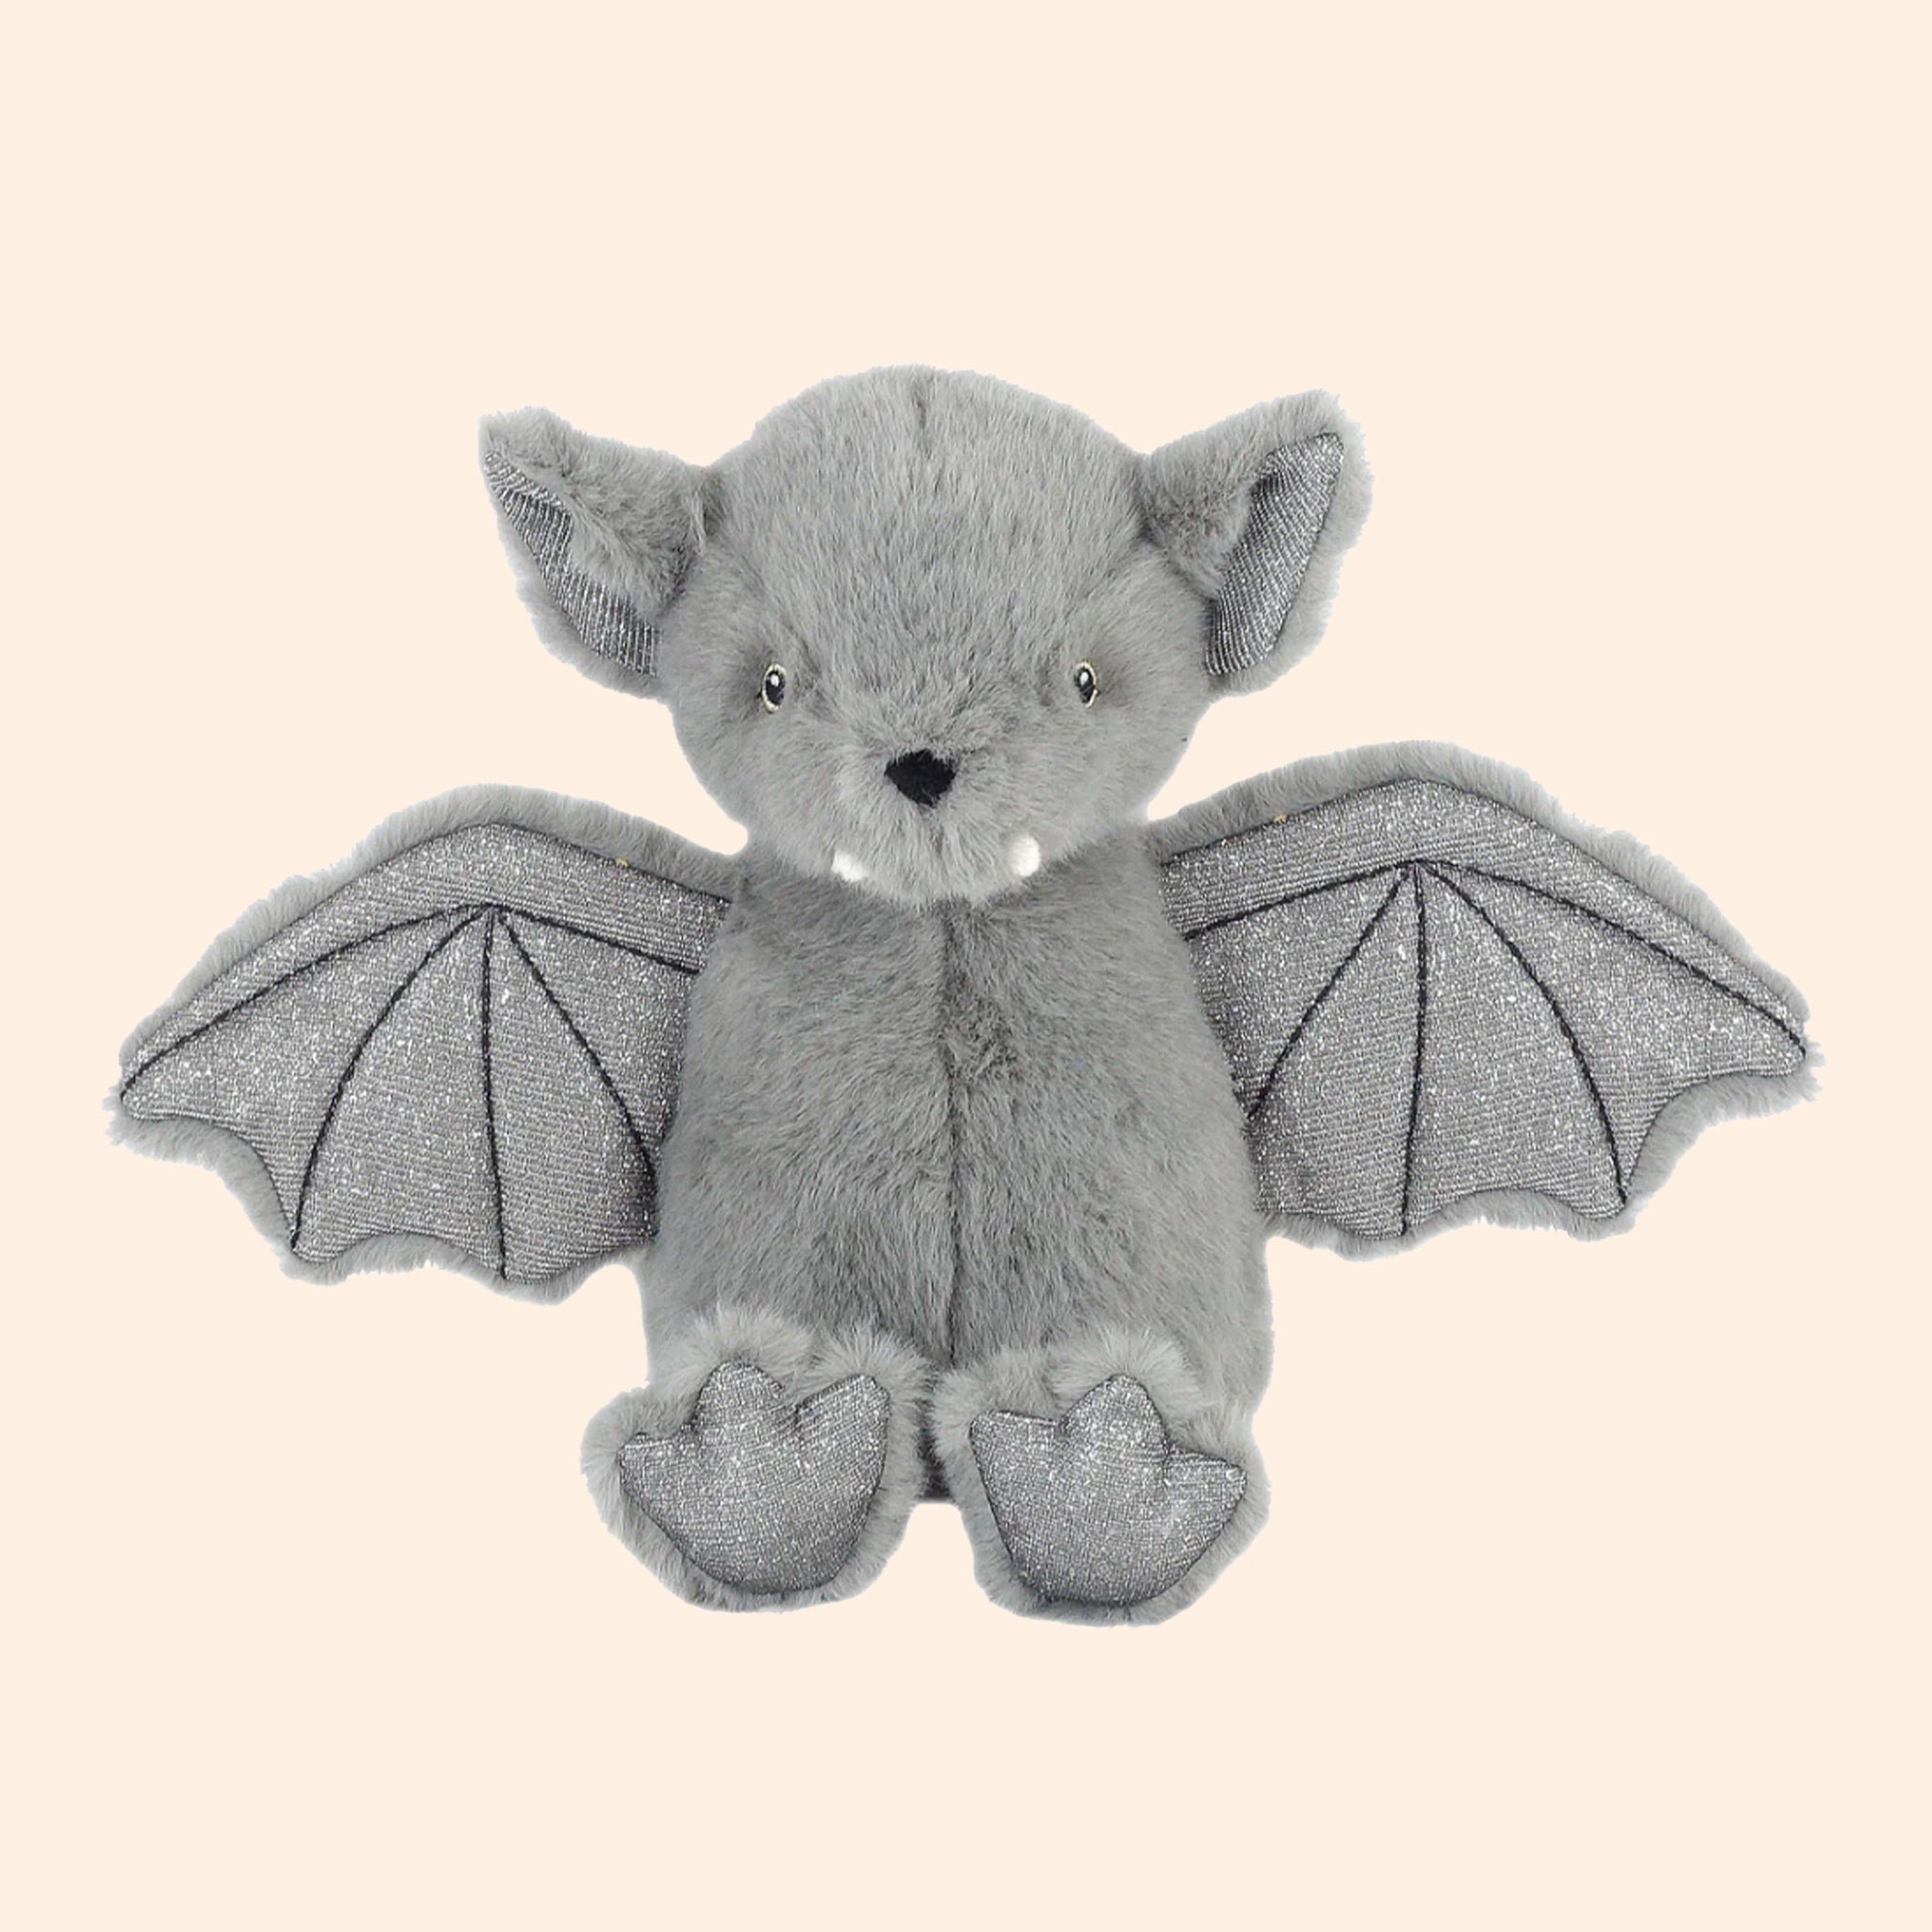 A grey bat stuffed toy with sparkle wing details.